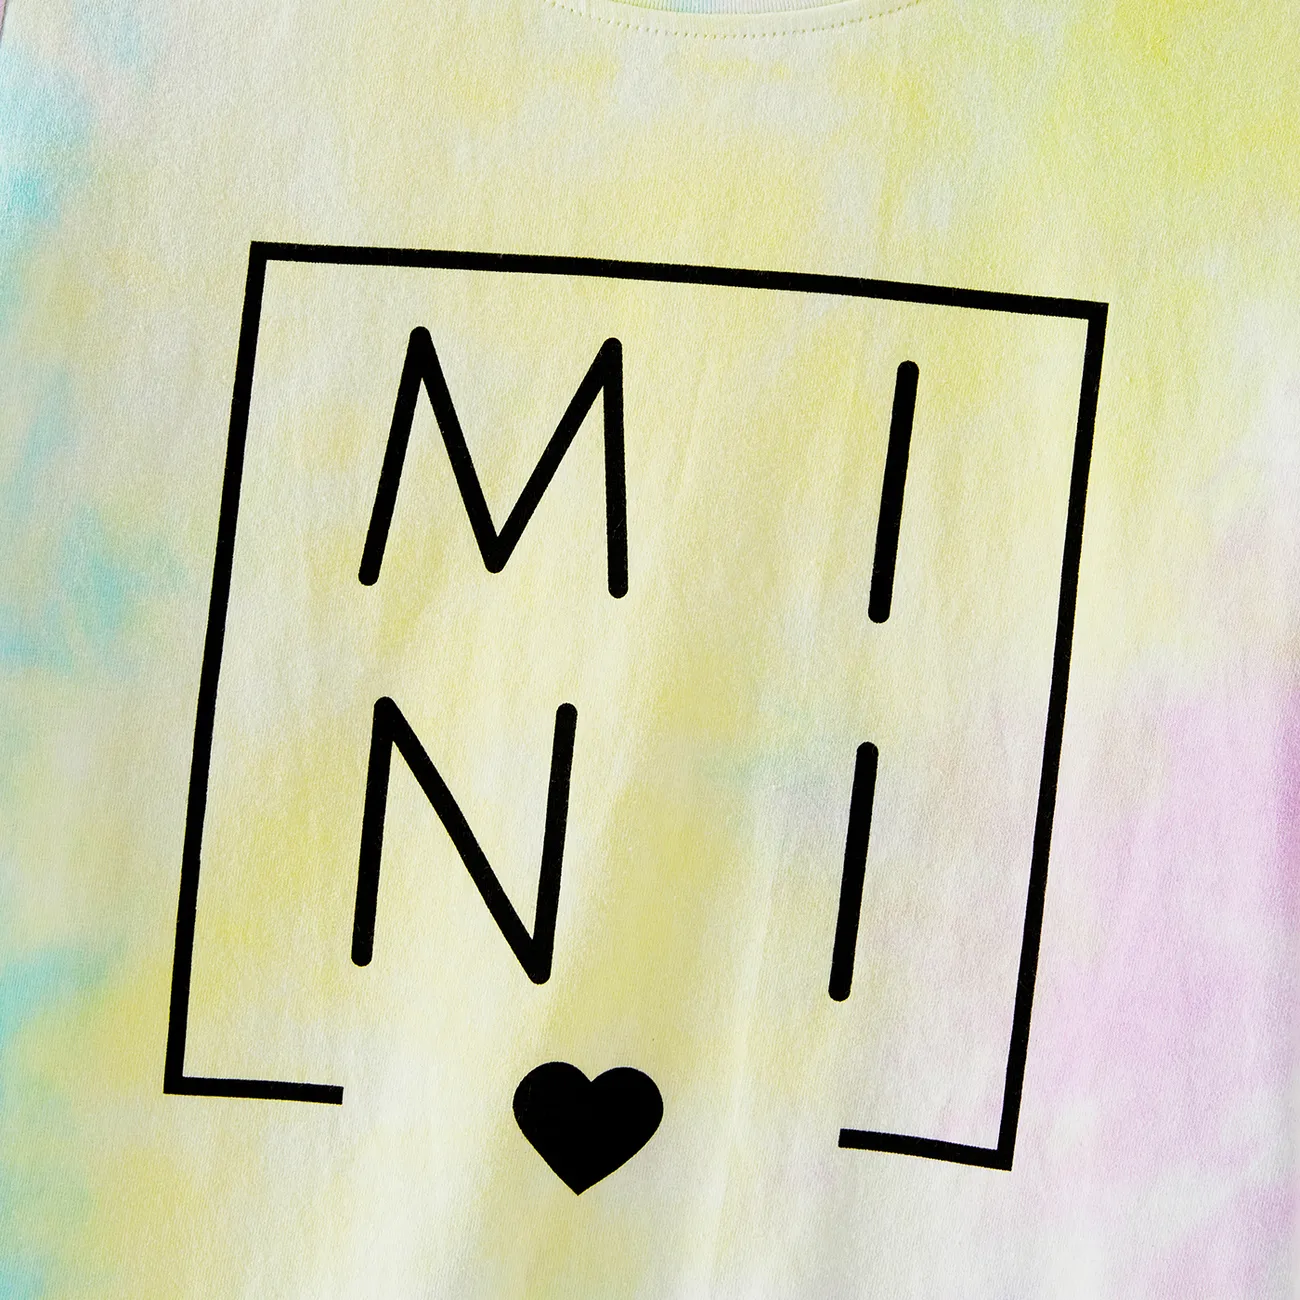 Mommy and Me 95% Cotton Letter Print Tie Dye Short-sleeve Tee Multi-color big image 1